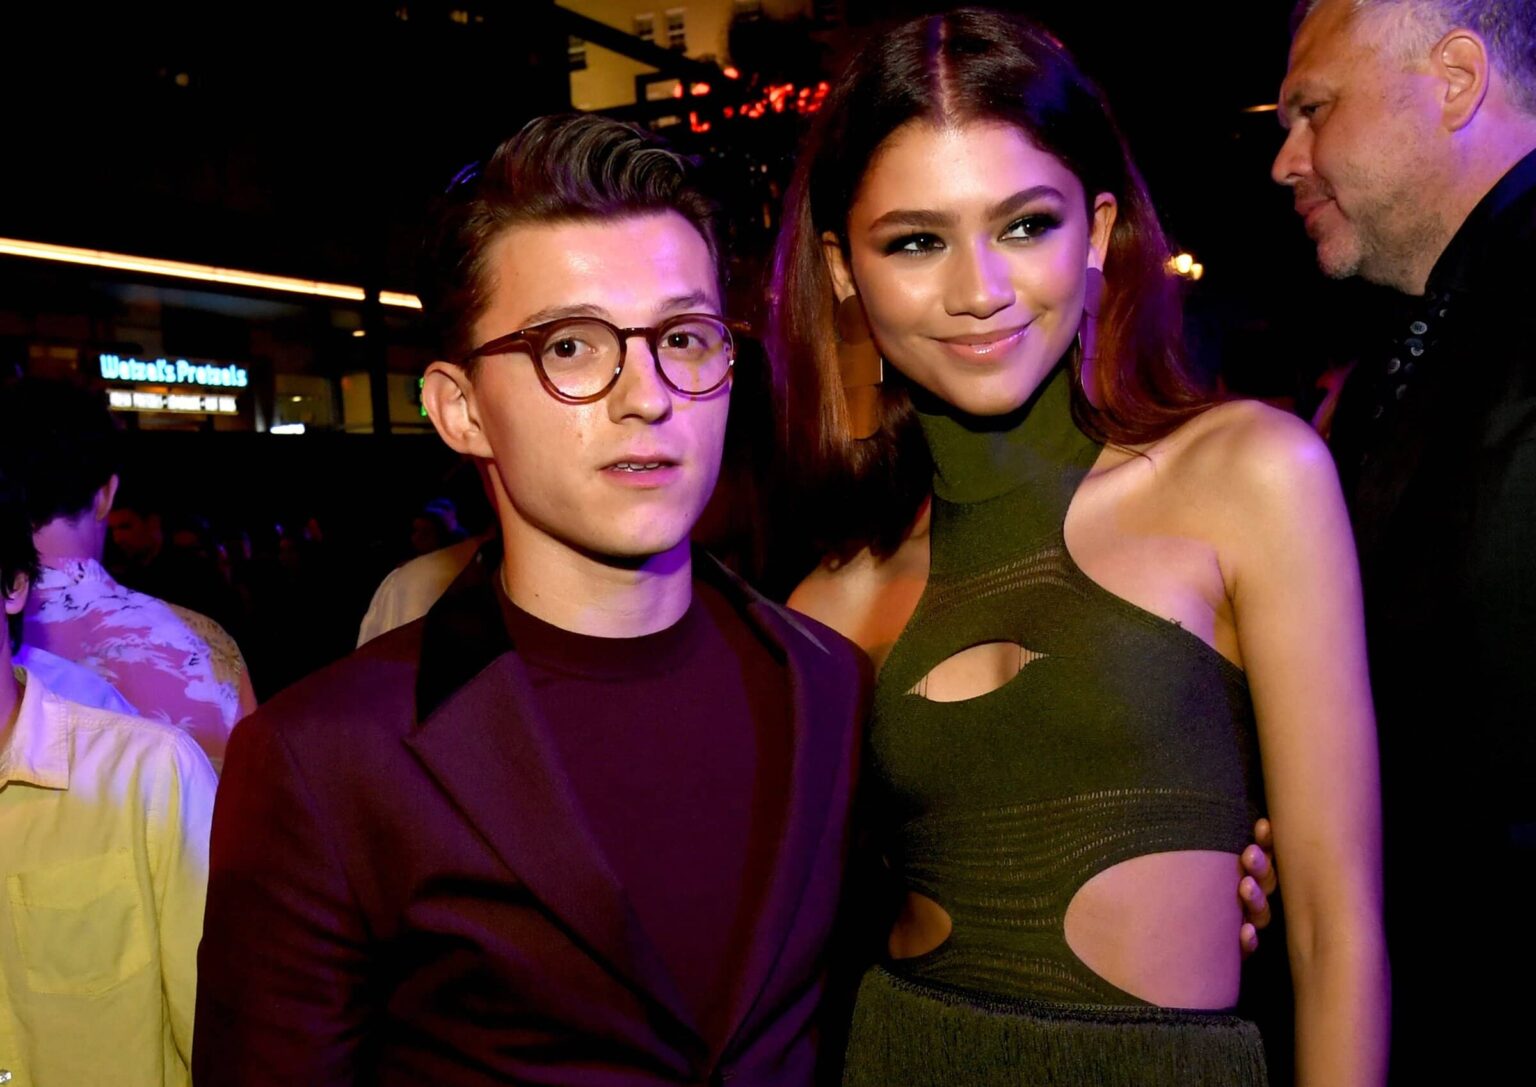 After years of speculation and rumors, we can finally confirm that 'Spider-Man' co-stars Tom Holland and Zendaya are dating! Find out all the details here.